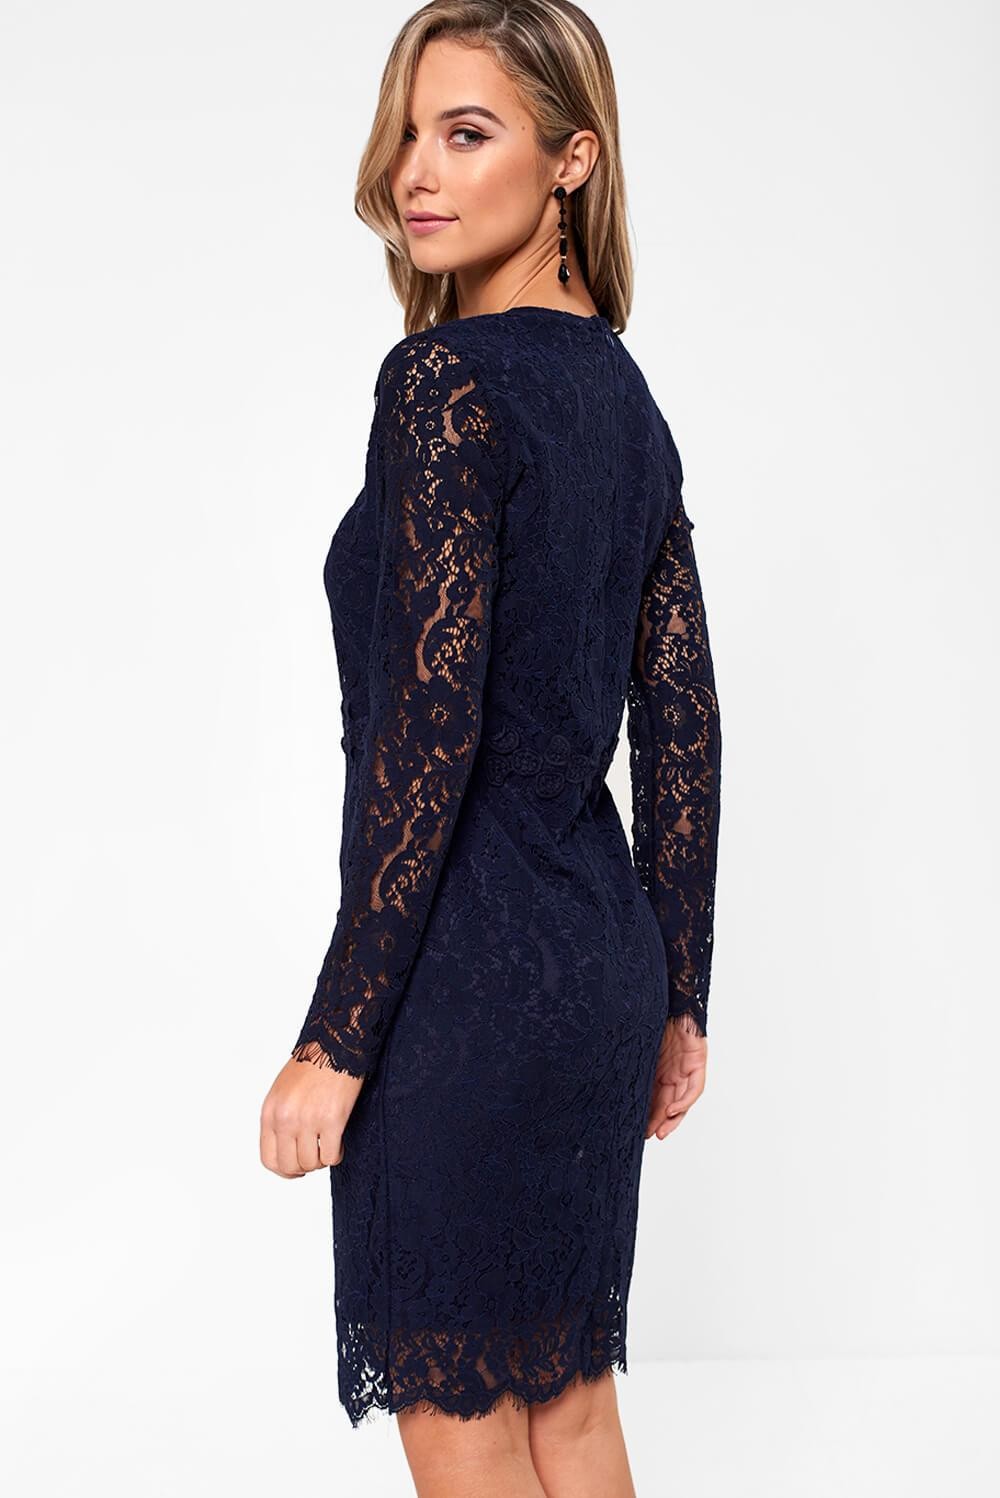 Marc Angelo Katie Long Sleeve Lace Dress in Navy | iCLOTHING